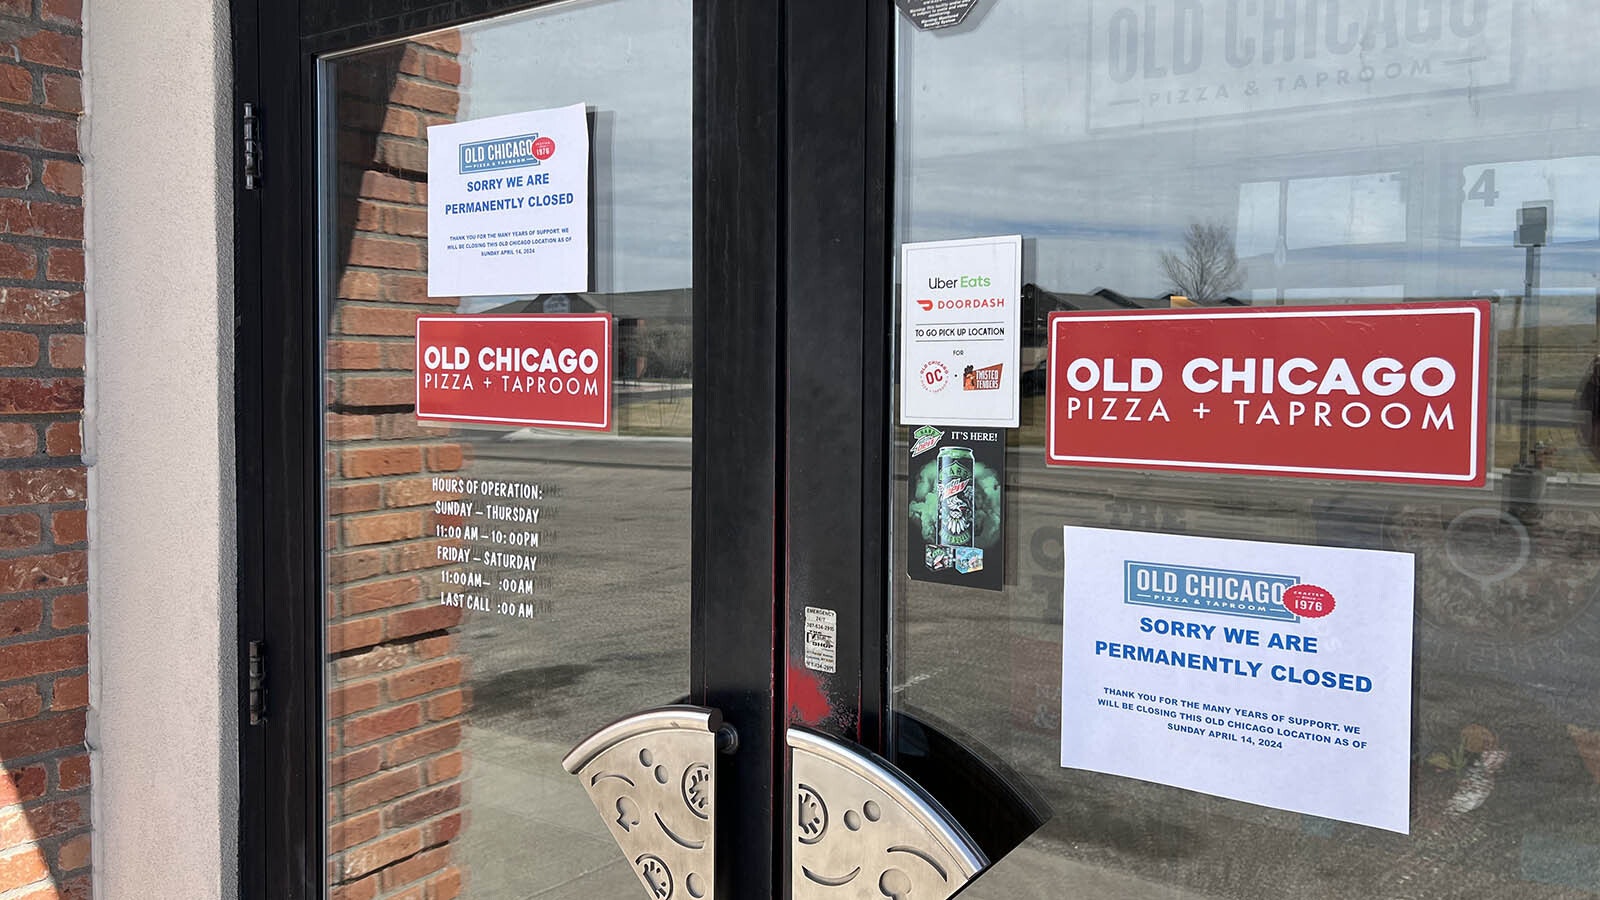 The Old Chicago restaurant in Cheyenne abruptly and permanently closed Sunday night. Signs on the front doors Monday inform customers.